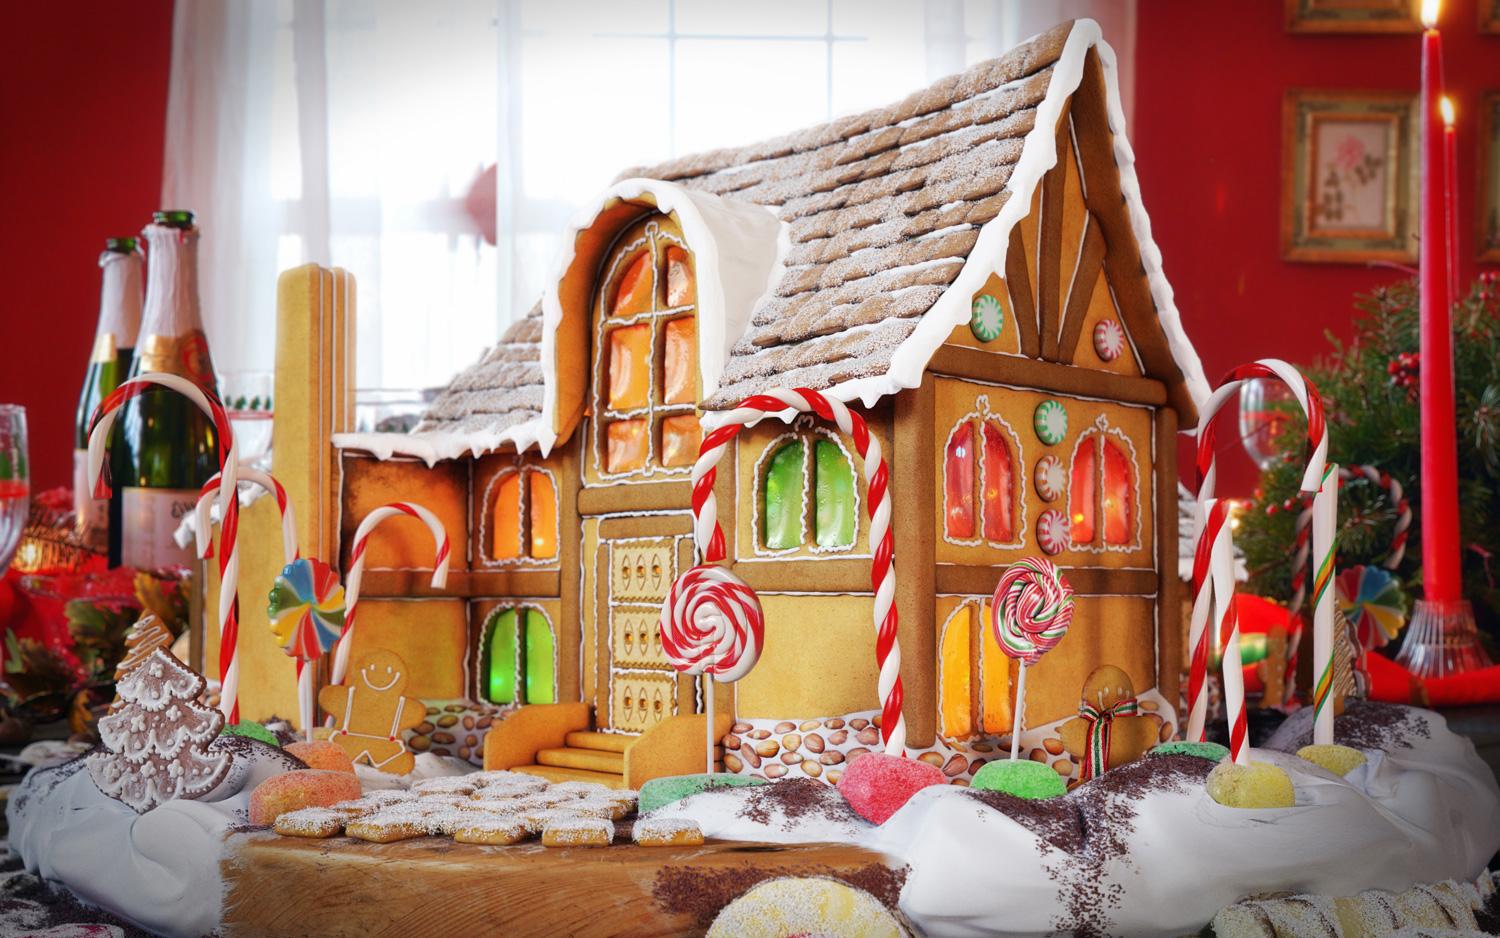 Free download Gingerbread House Background Making of ginger